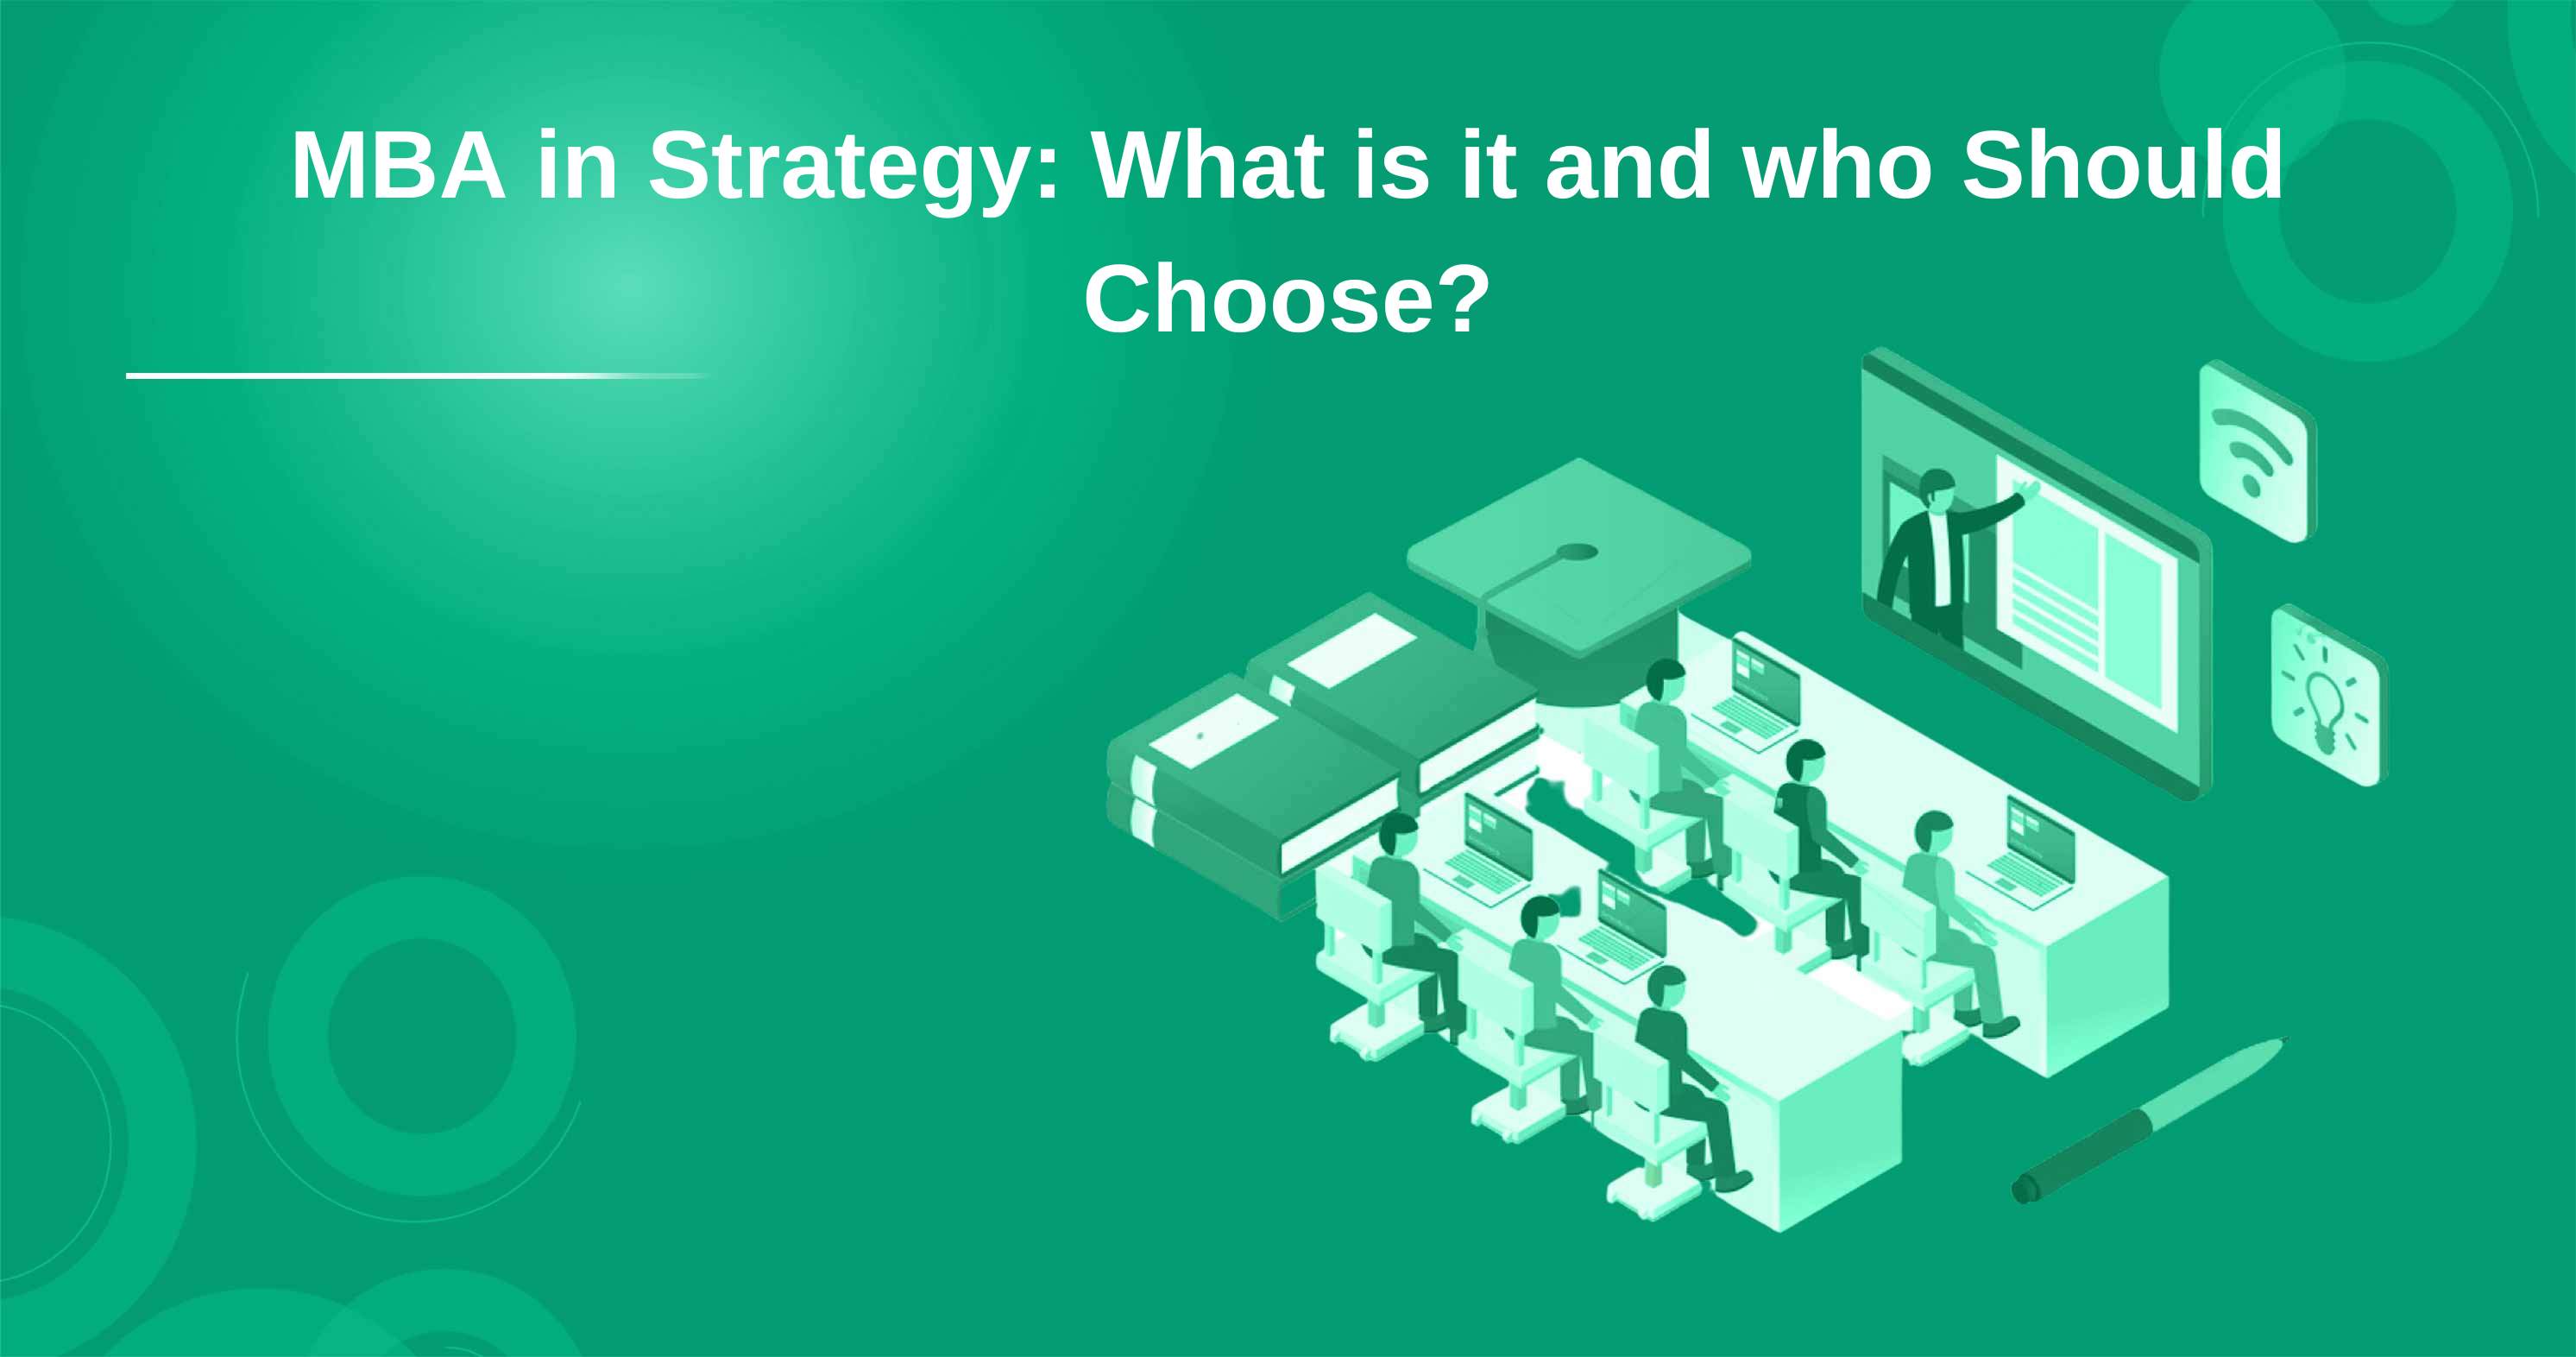 MBA in Strategy: What is it and who Should Choose?